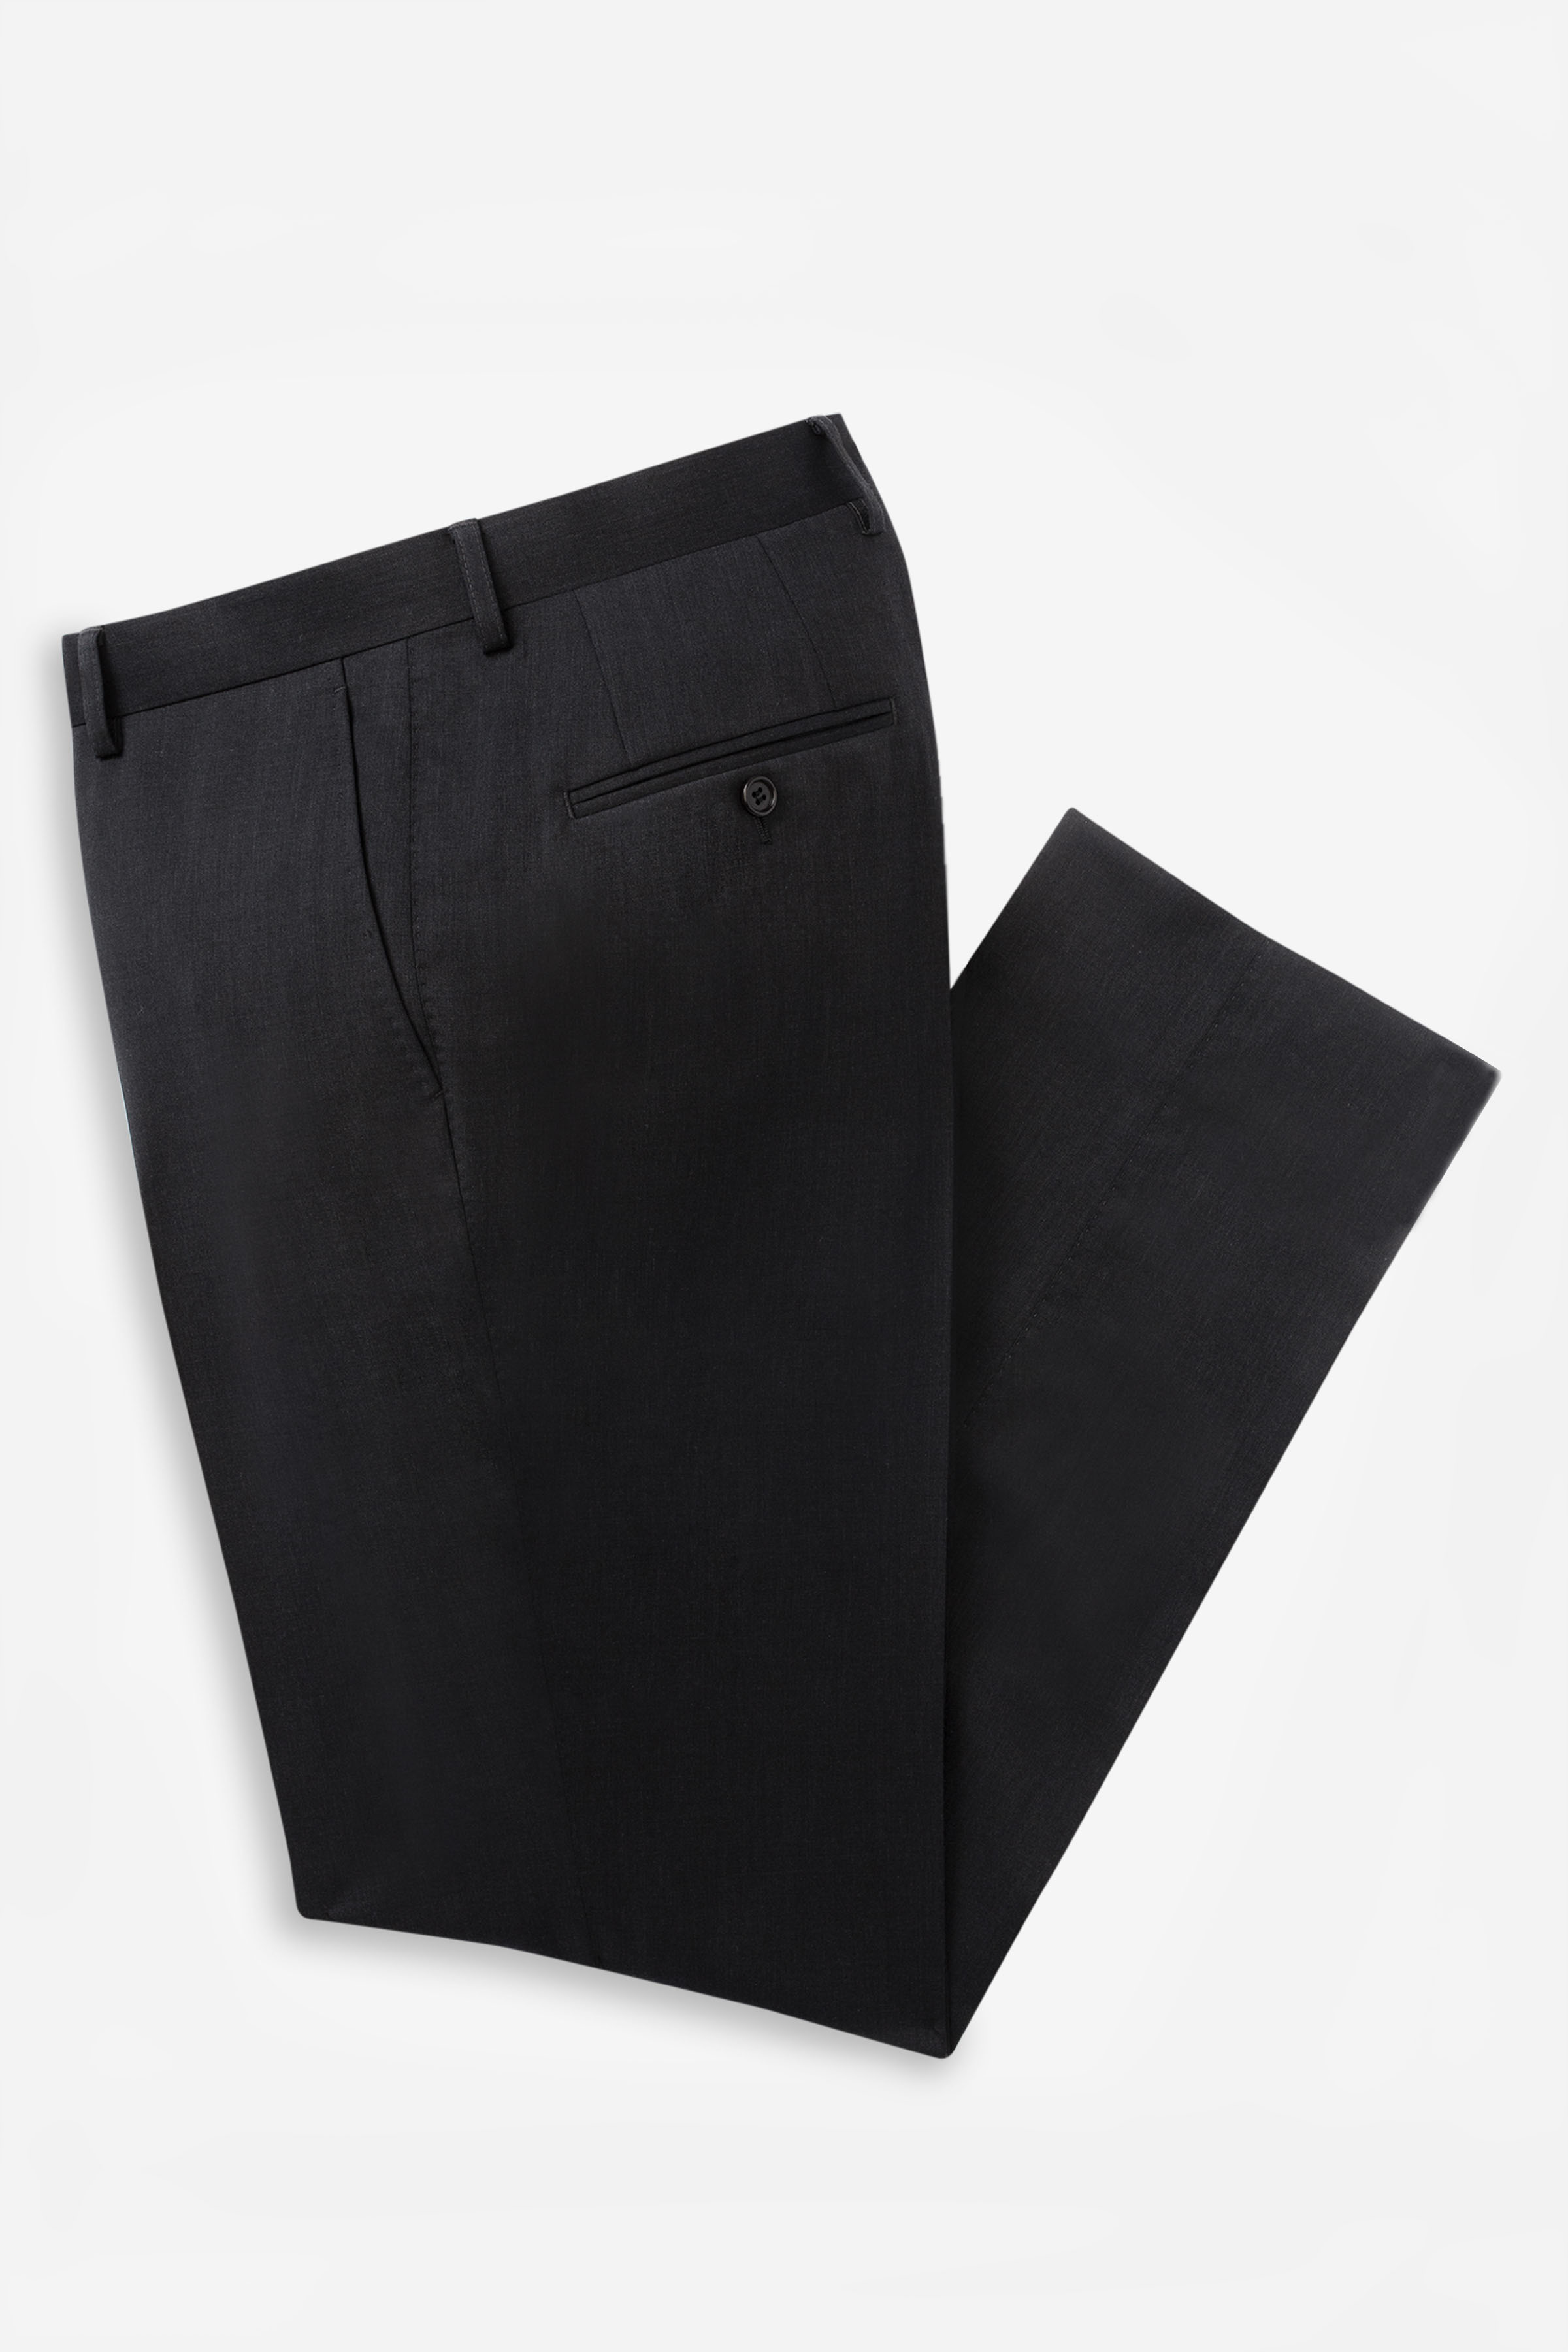 Knot Standard Charcoal Trousers by Knot Standard